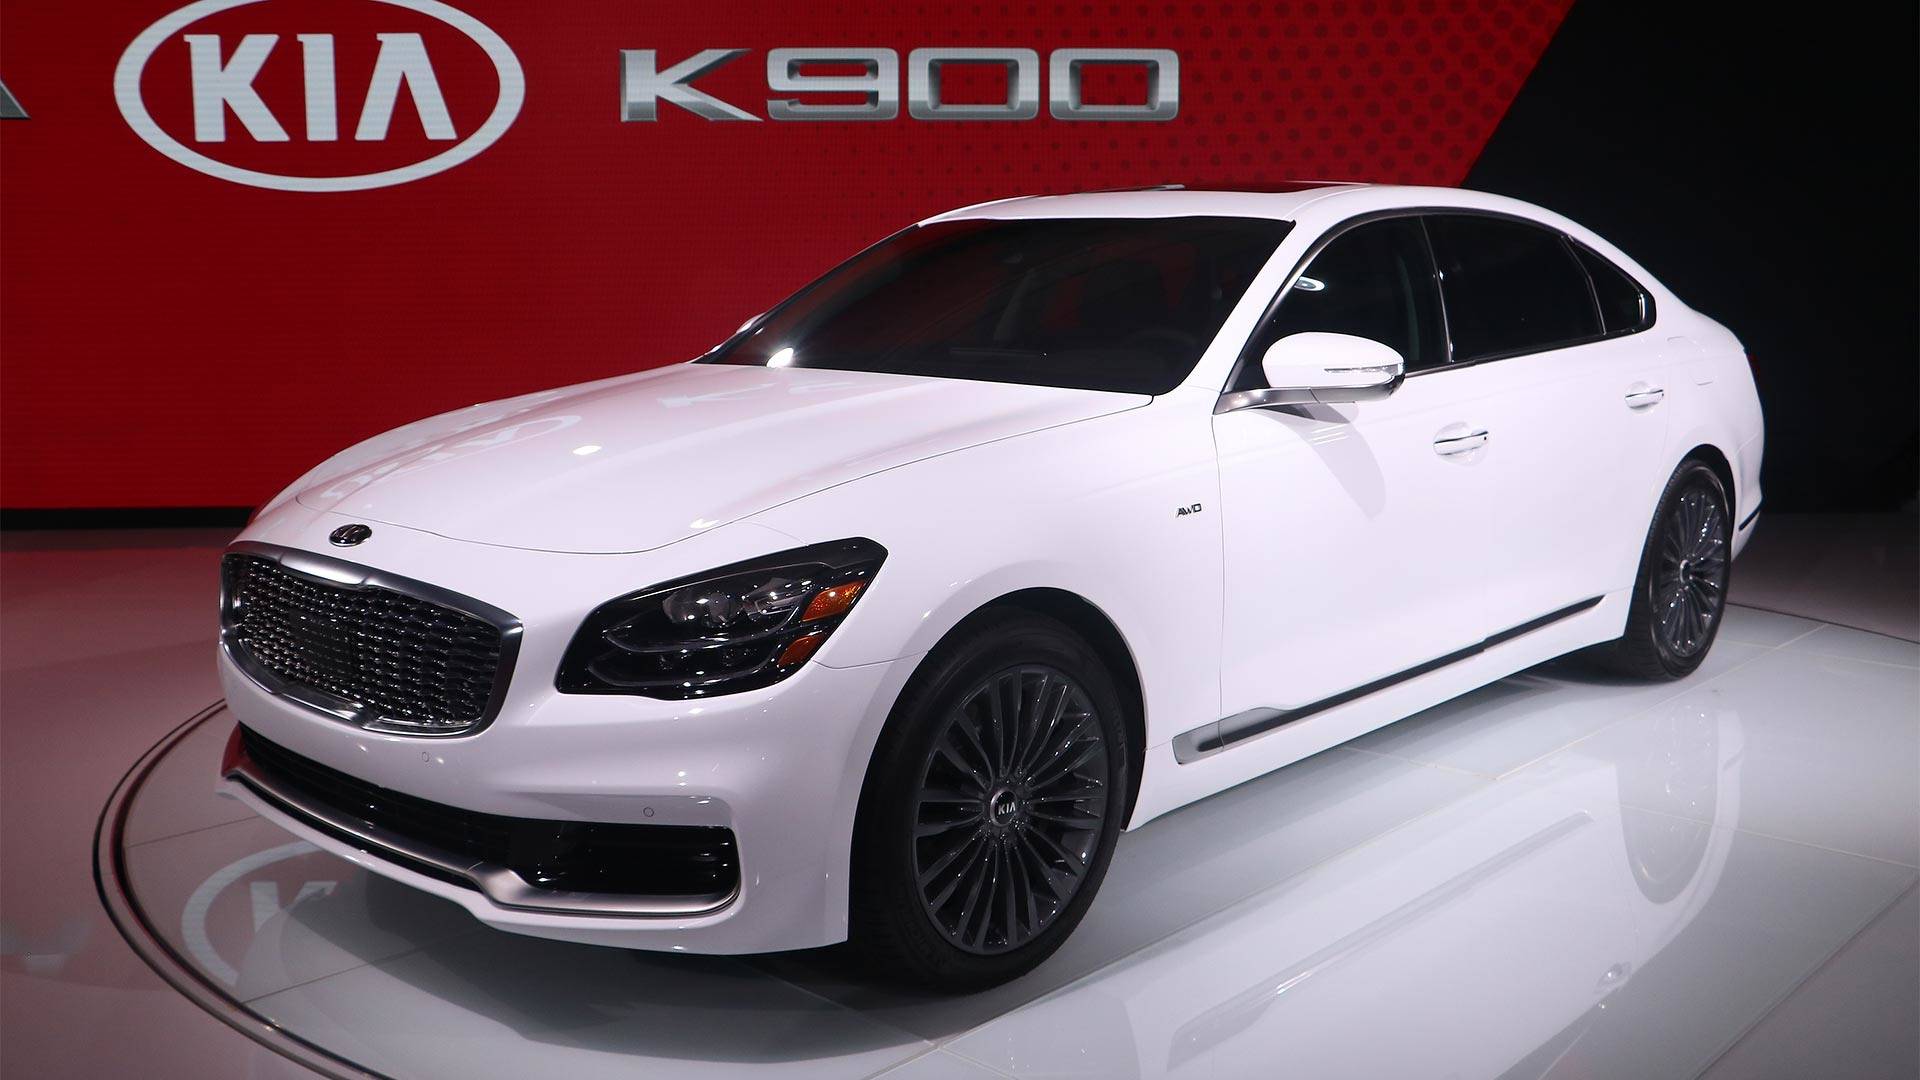 2019 Kia K900 Makes A Handsome Debut In New York